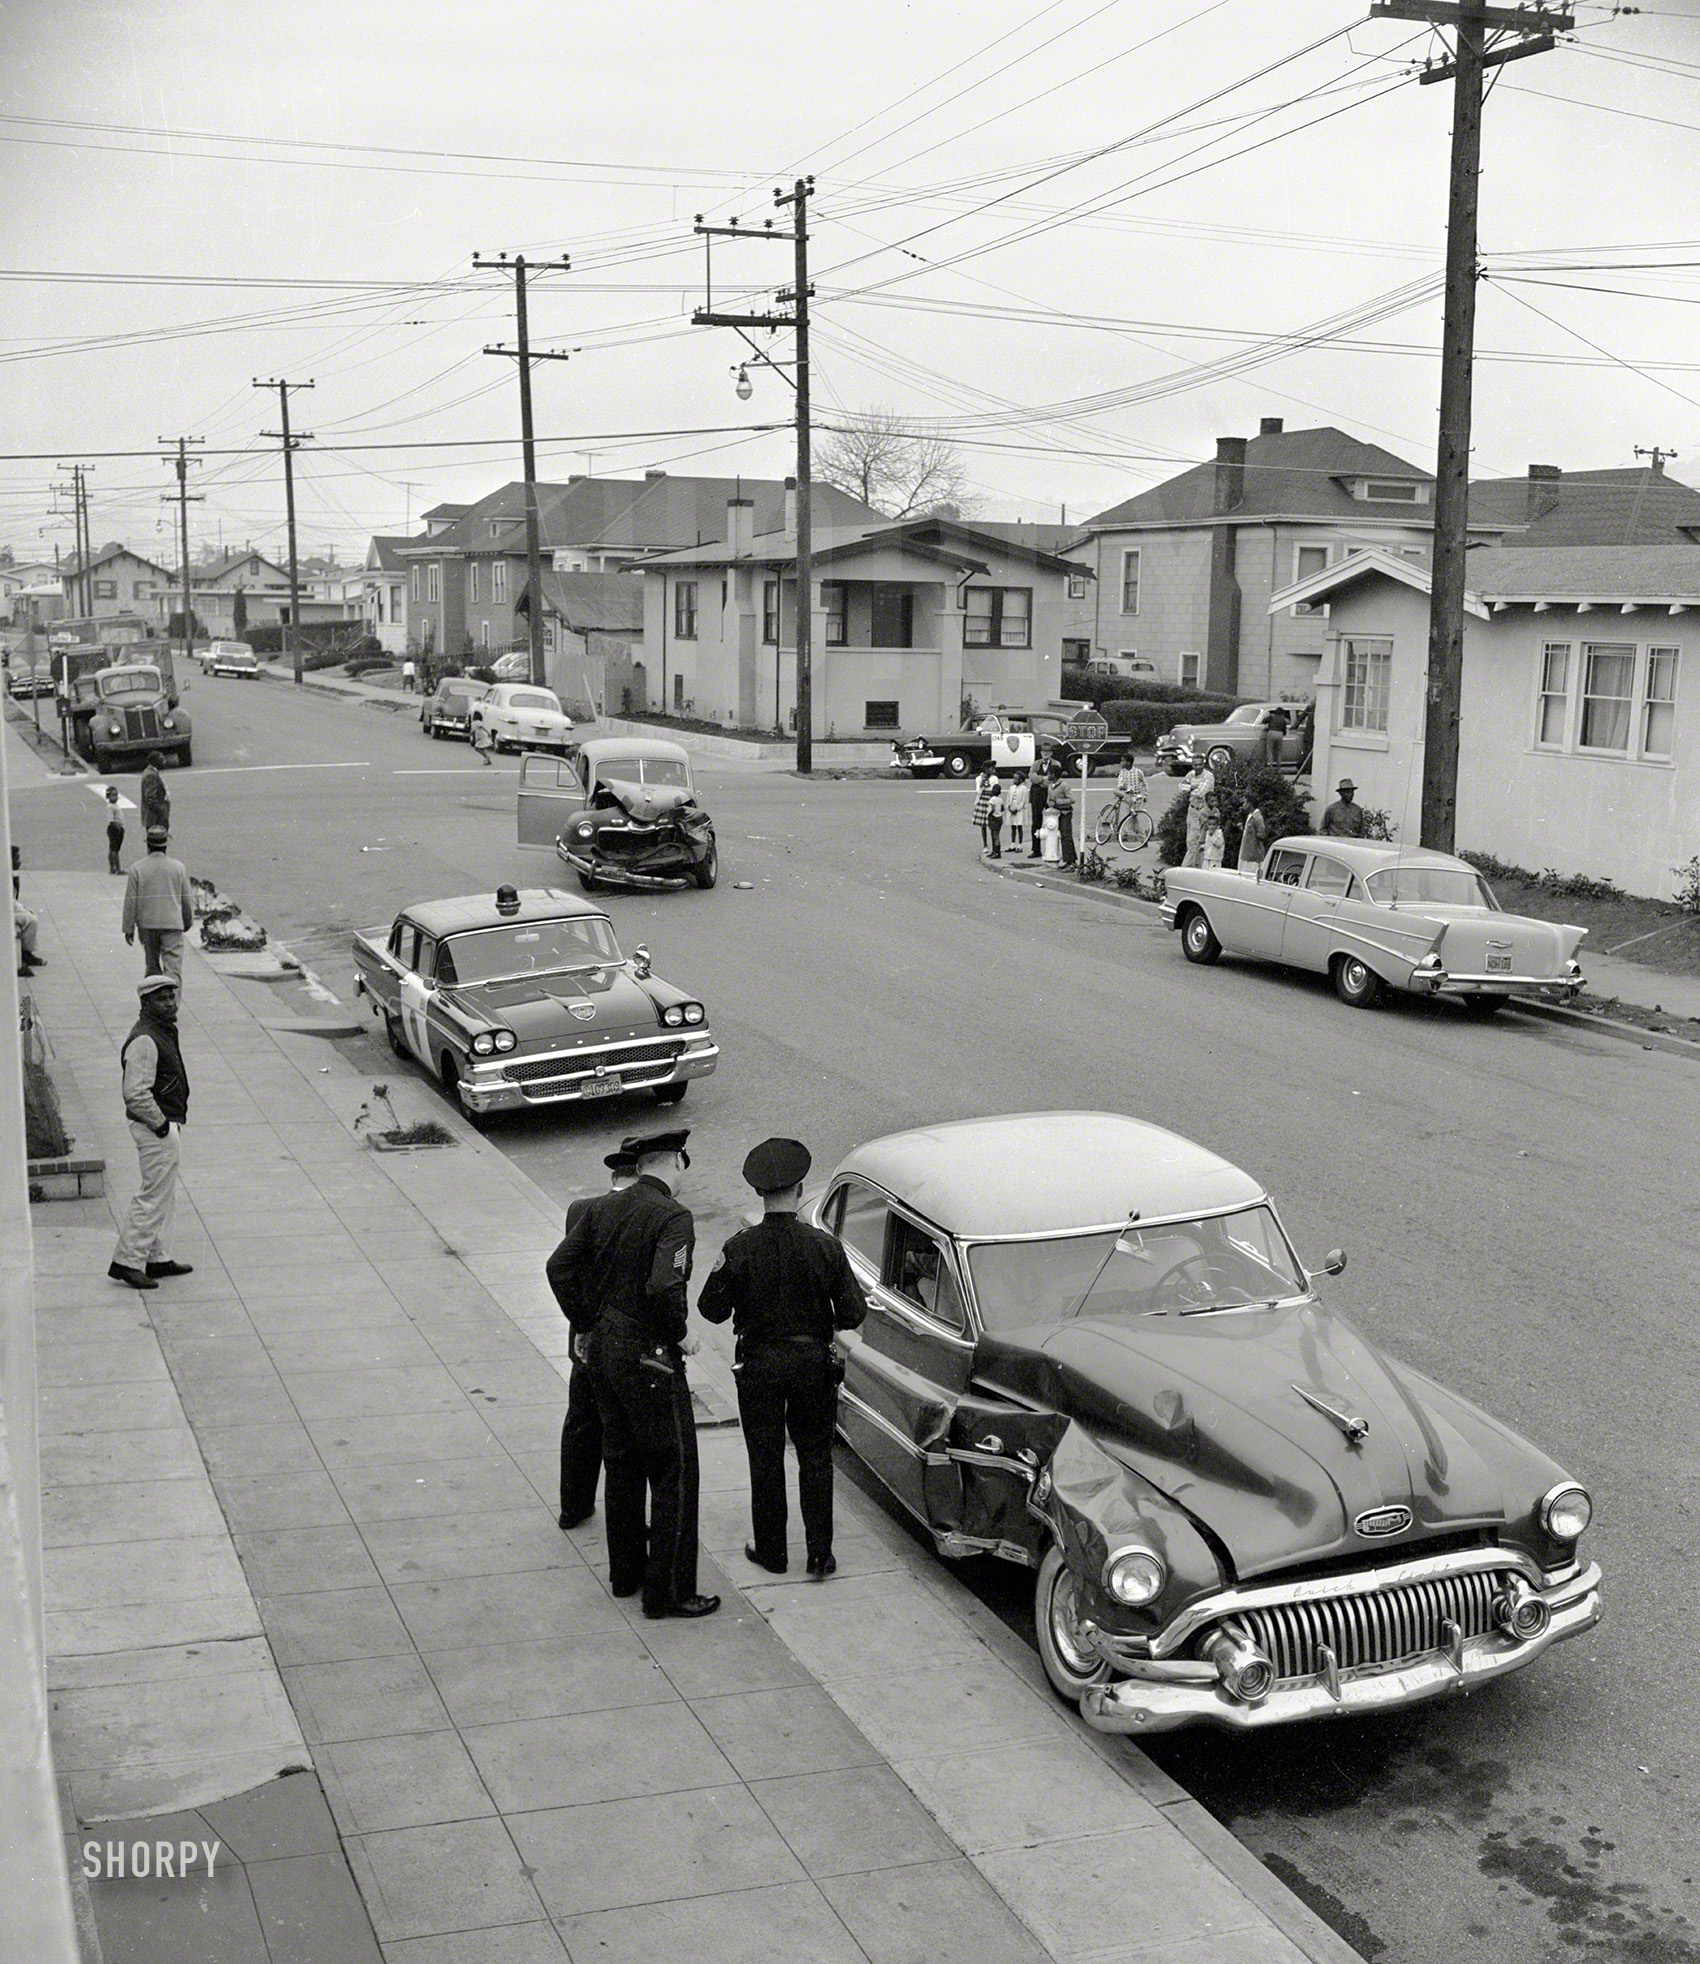 Oakland, Calif., circa 1958, and yet another fender-bender. Let's move along, folks. Nothing to see here! 4x5 acetate negative from the News Archive. View full size.